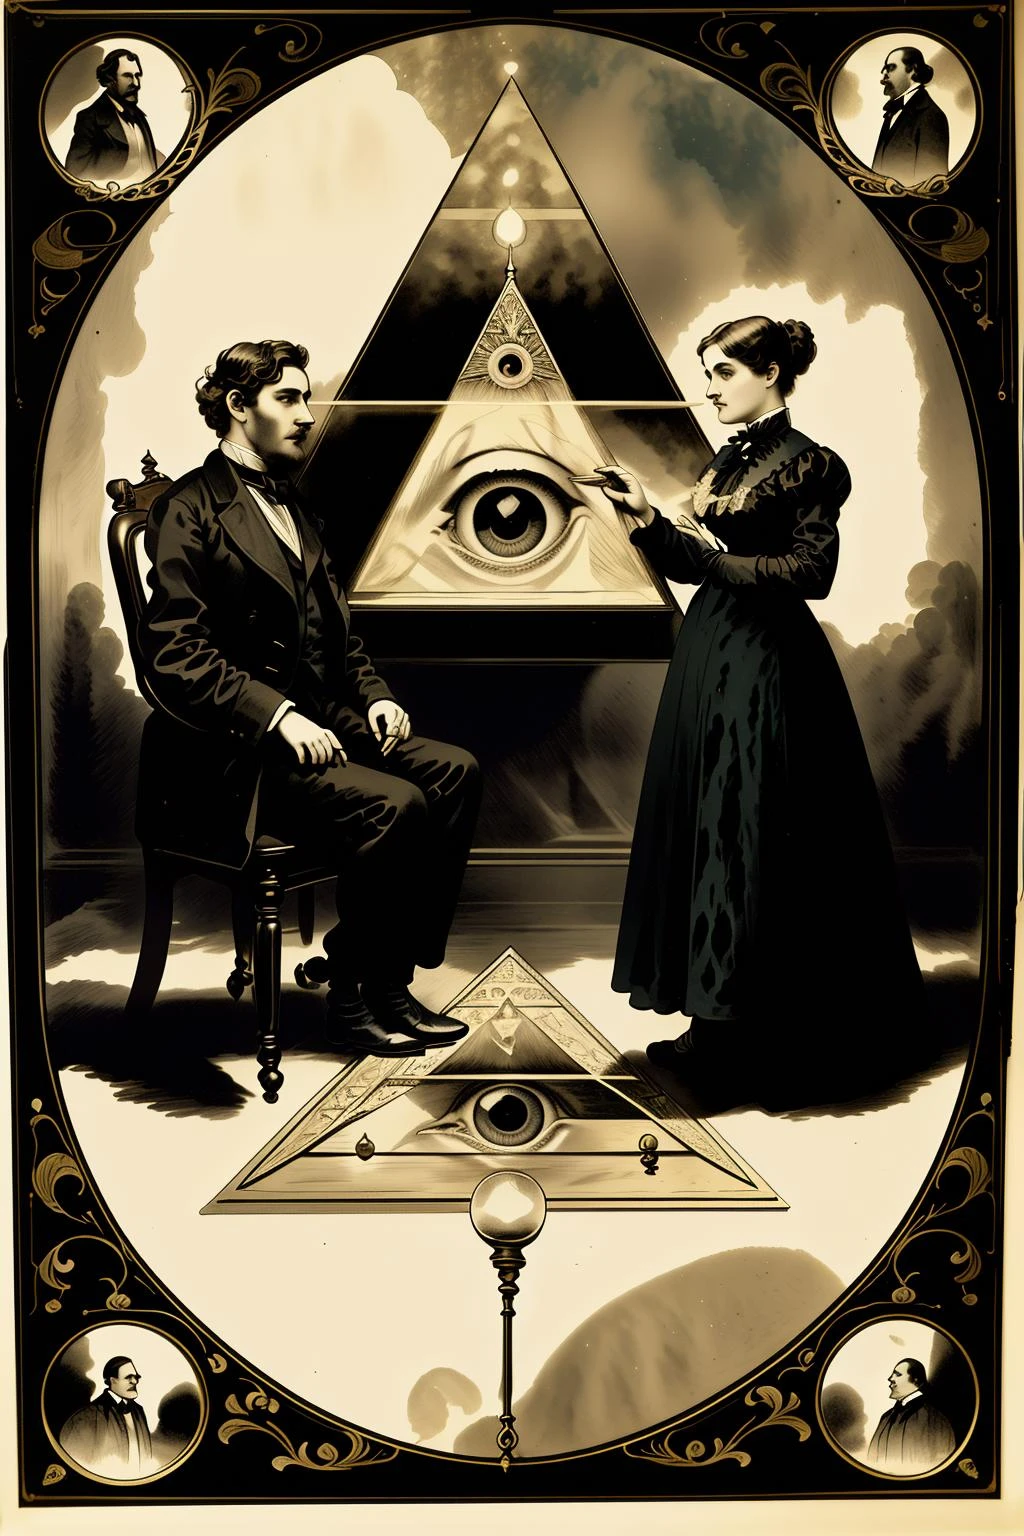 a 维多利亚时代  poster advertising a  a painting of two people sitting on a rug in front of a pyramid with an eye in the center of the image and a third person standing on the floor , 1800, 查尔斯·麦考利, 1860 年成立, 丝网, 美国巴比松画派,  维多利亚时代_深奥的 , (( 维多利亚时代 style graphic ))